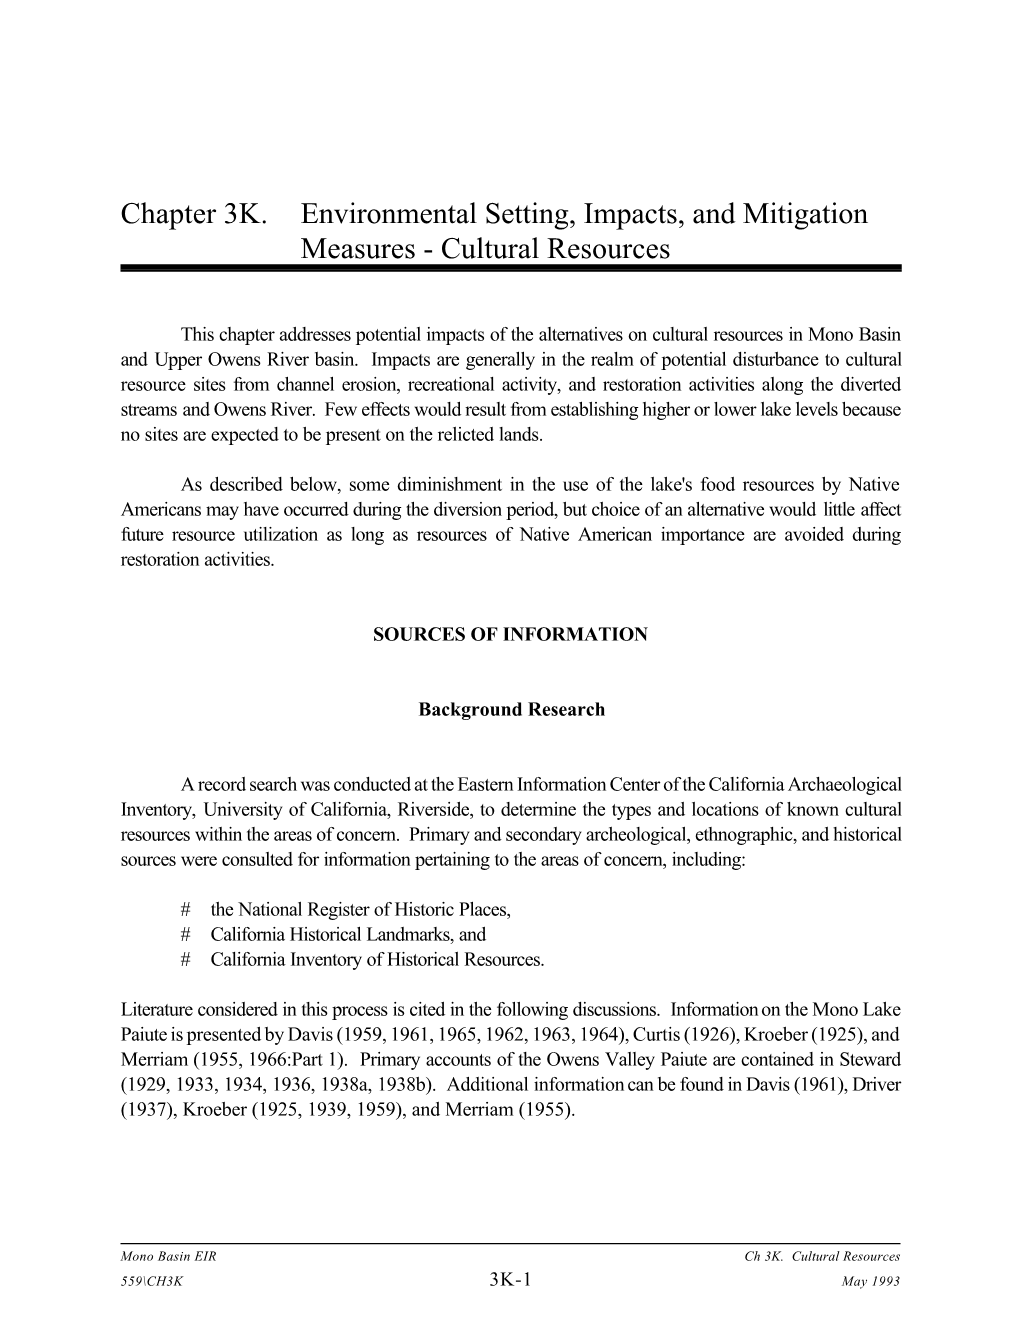 Chapter 3K. Environmental Setting, Impacts, and Mitigation Measures - Cultural Resources